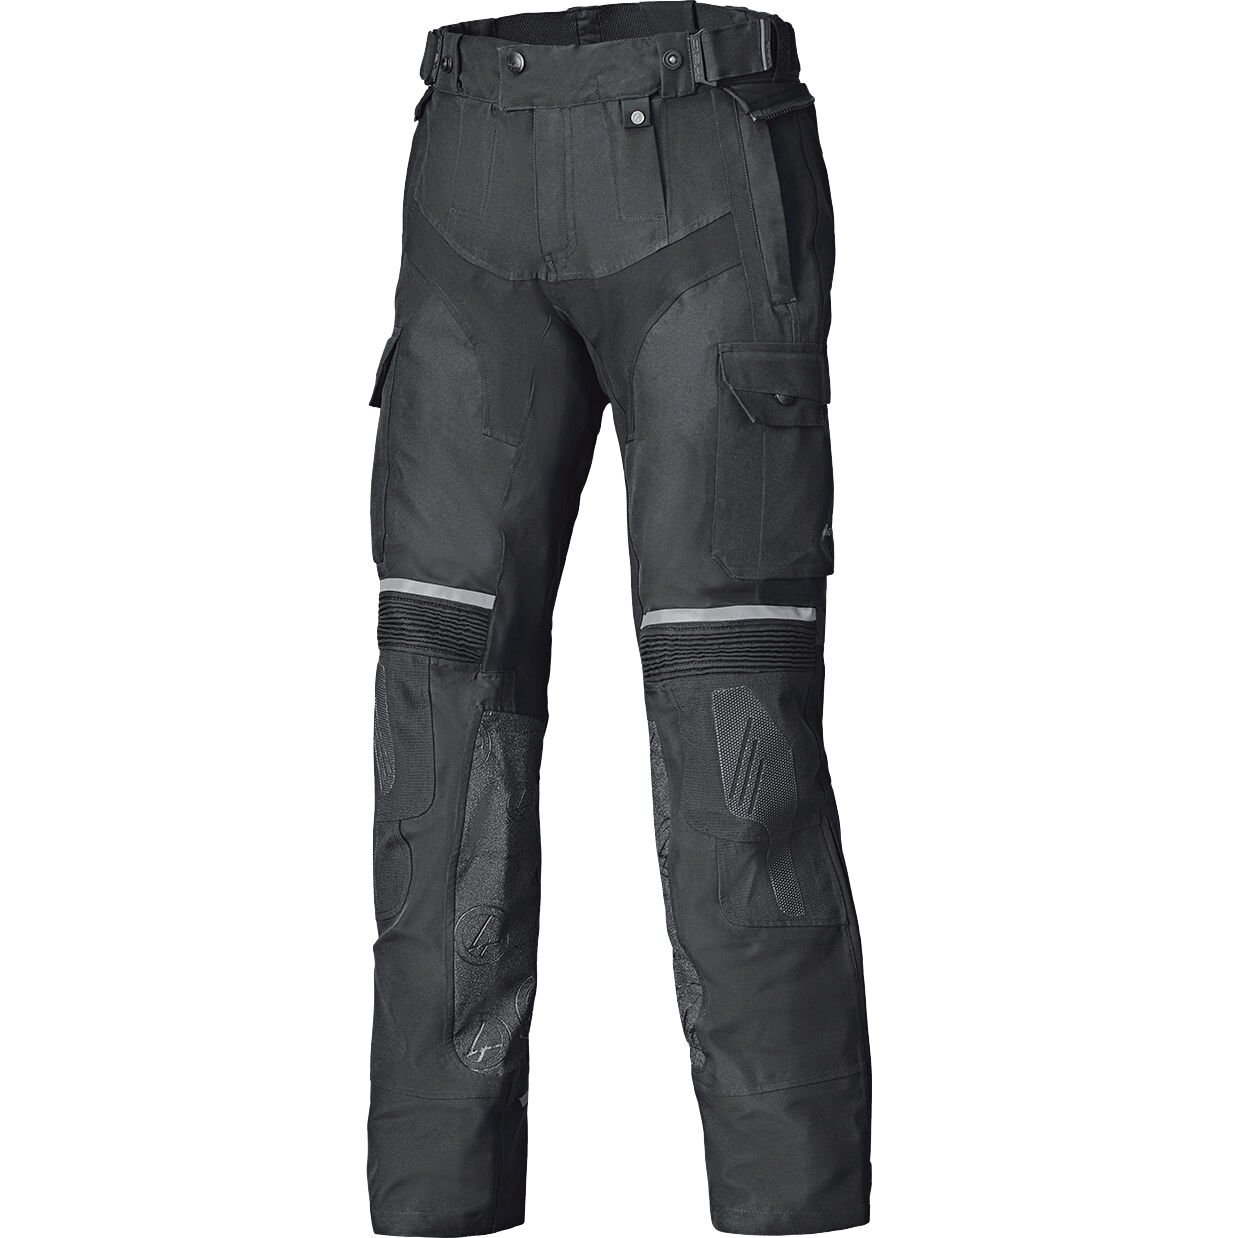 Textile Motorcycle Trousers  FREE UK DELIVERY  RETURNS  Urban Rider